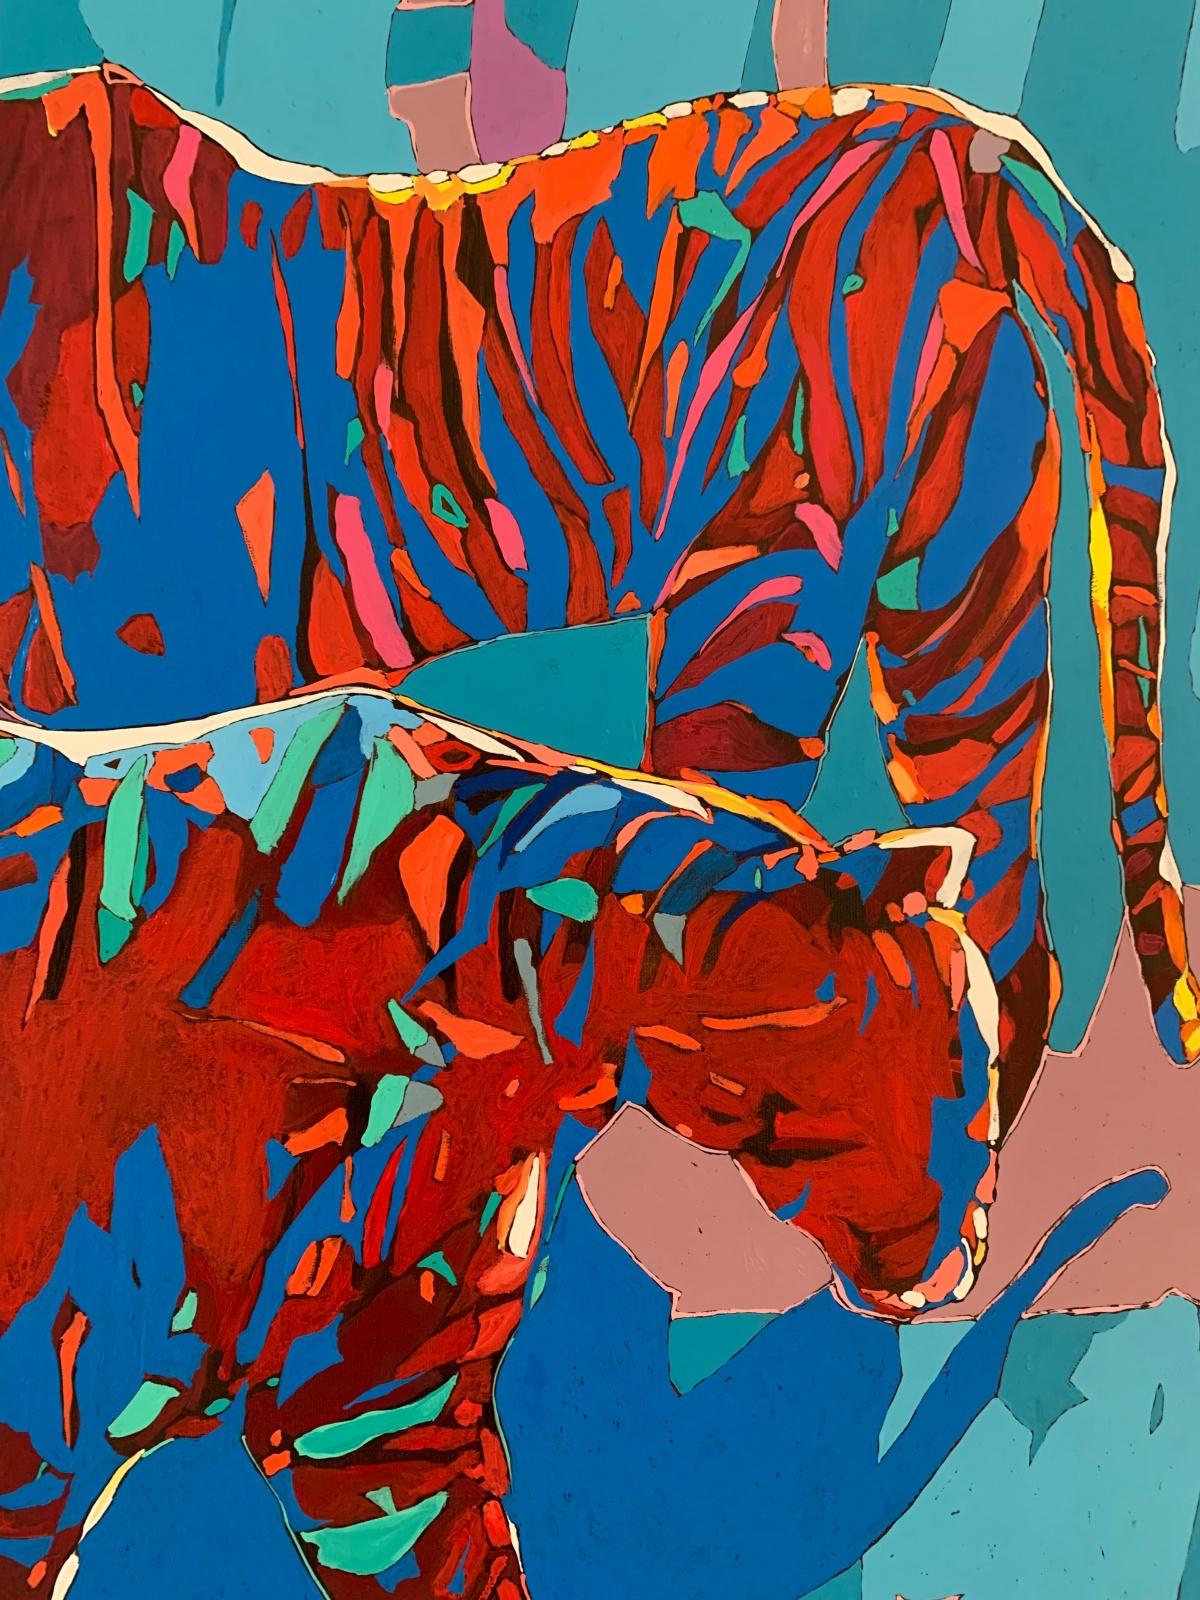 Contemporary figurative oil on canvas painting by Polish artist Rafal Gadowski. Painting in pop art style depicting two tigers. The background is geometric and mostly in blue color. Painting is bright with many dynamic shapes. Title of this painting